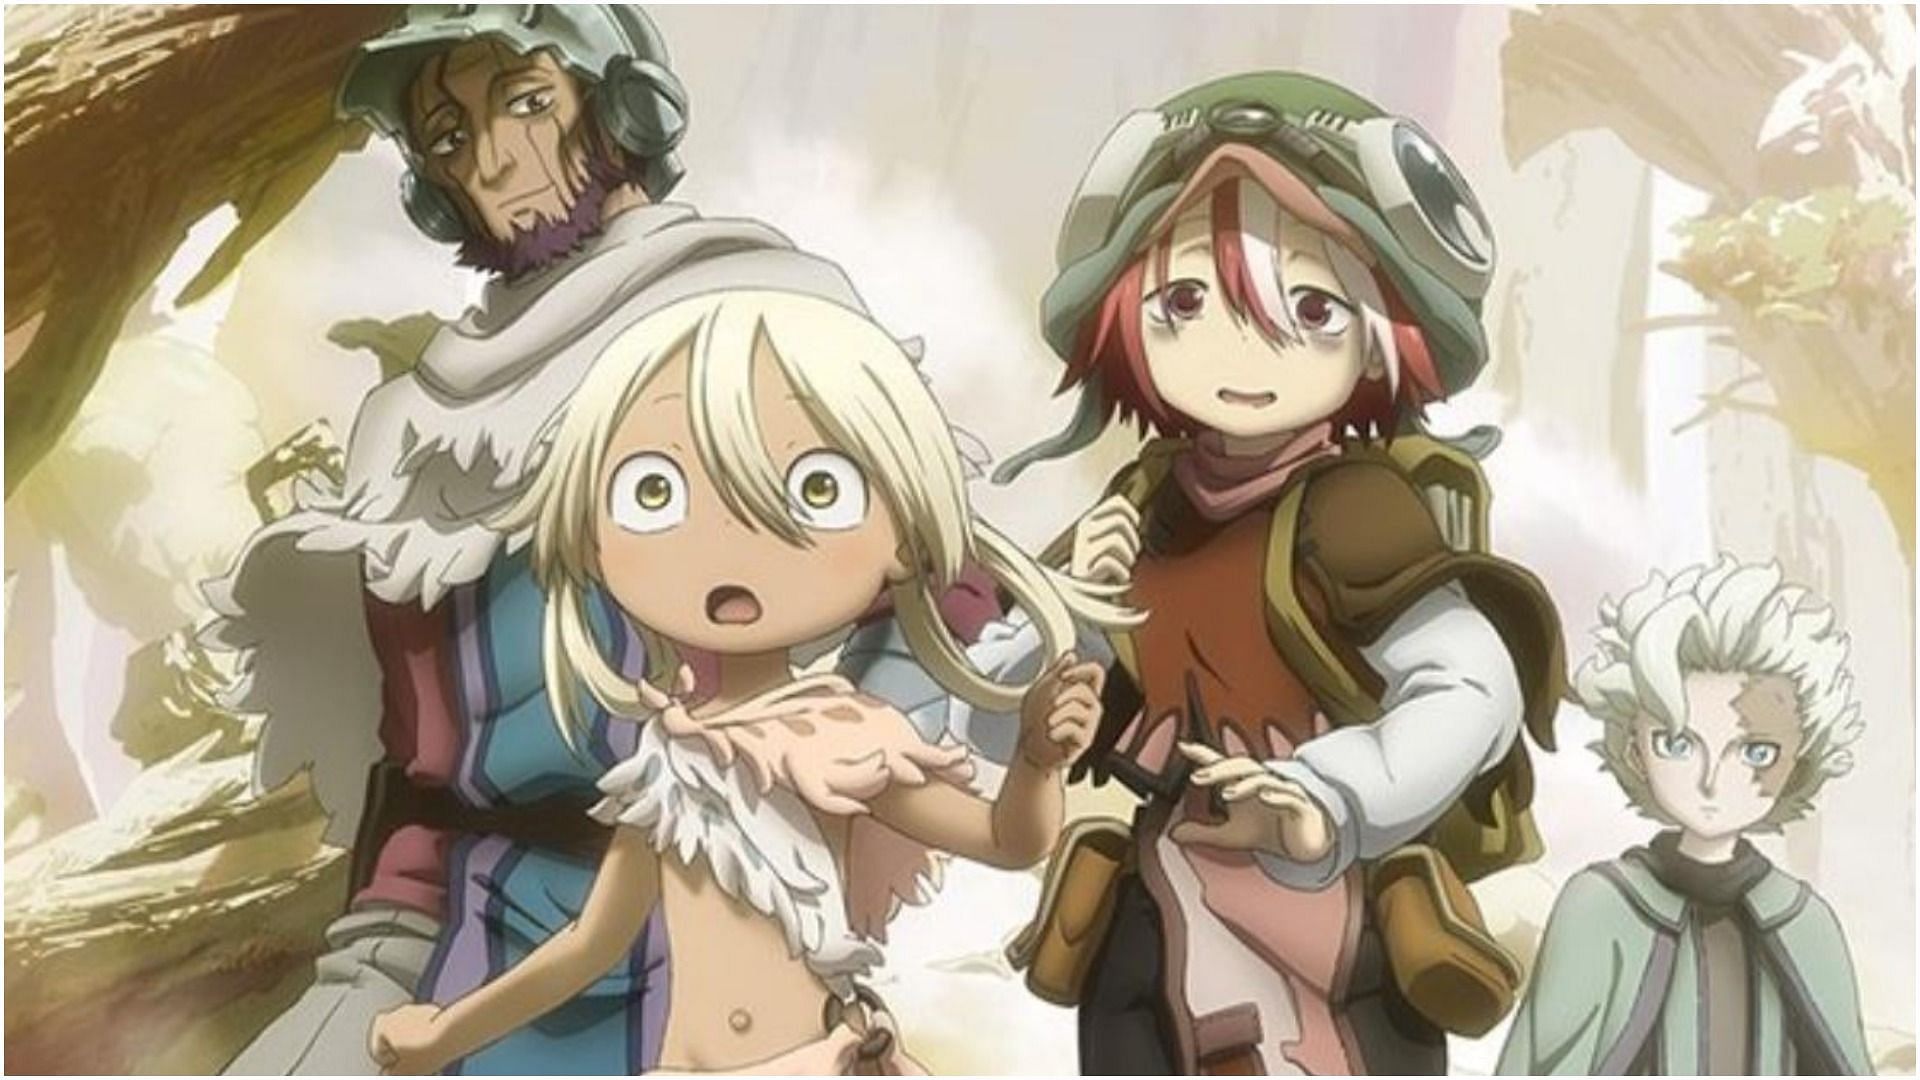 Made in Abyss: Season 2 confirms its release for the year 2022